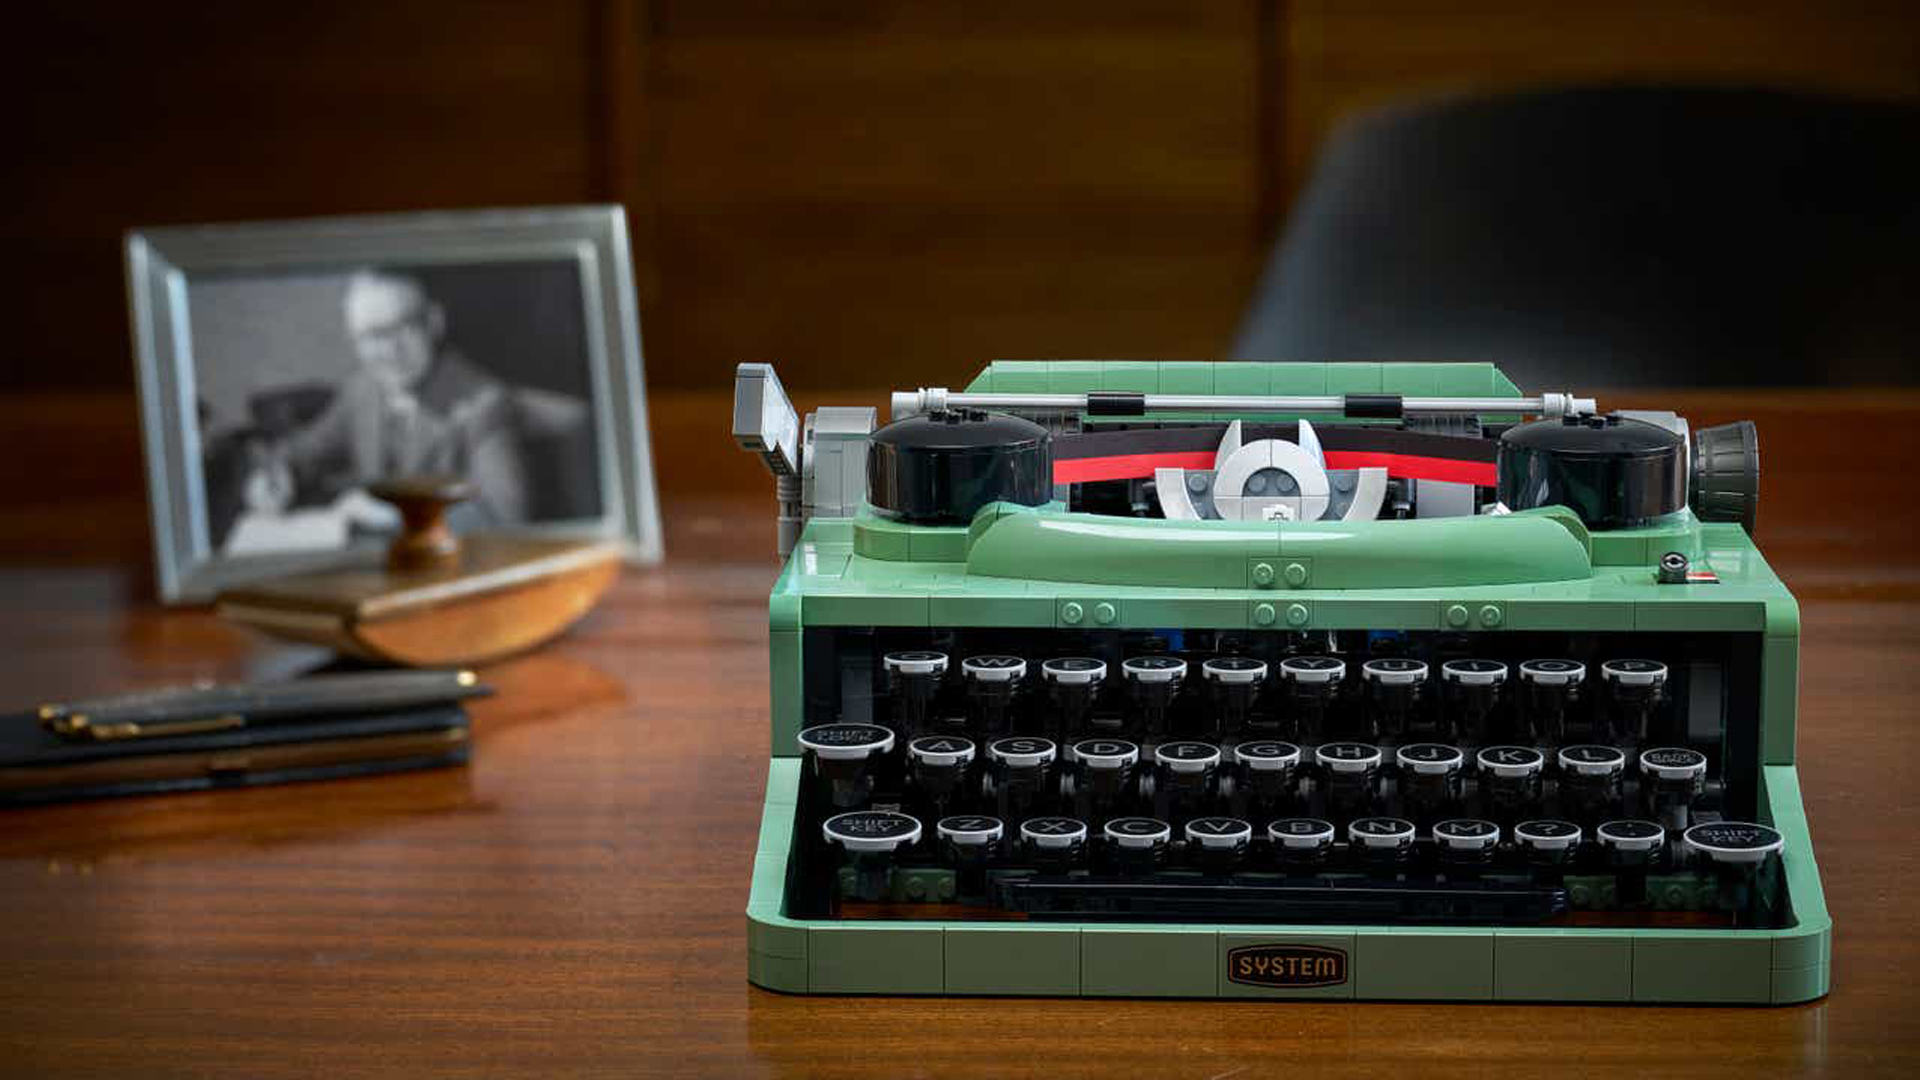 LEGO Excellent Debuted a Recent Typewriter Do and I Want to Write My Recent With It